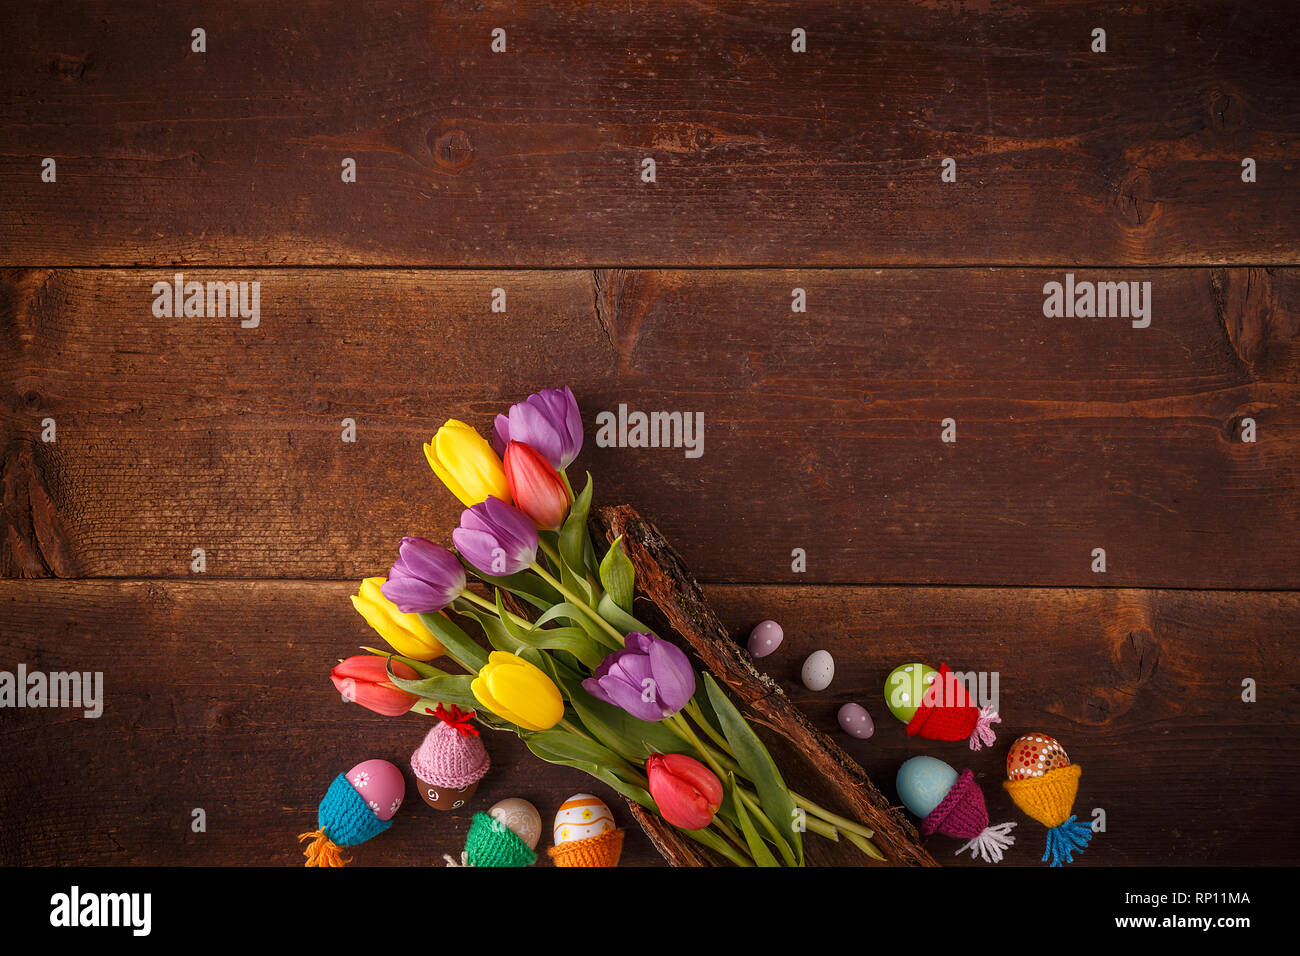 Easter composition with tulips and Easter eggs with little hats on wooden planks Stock Photo